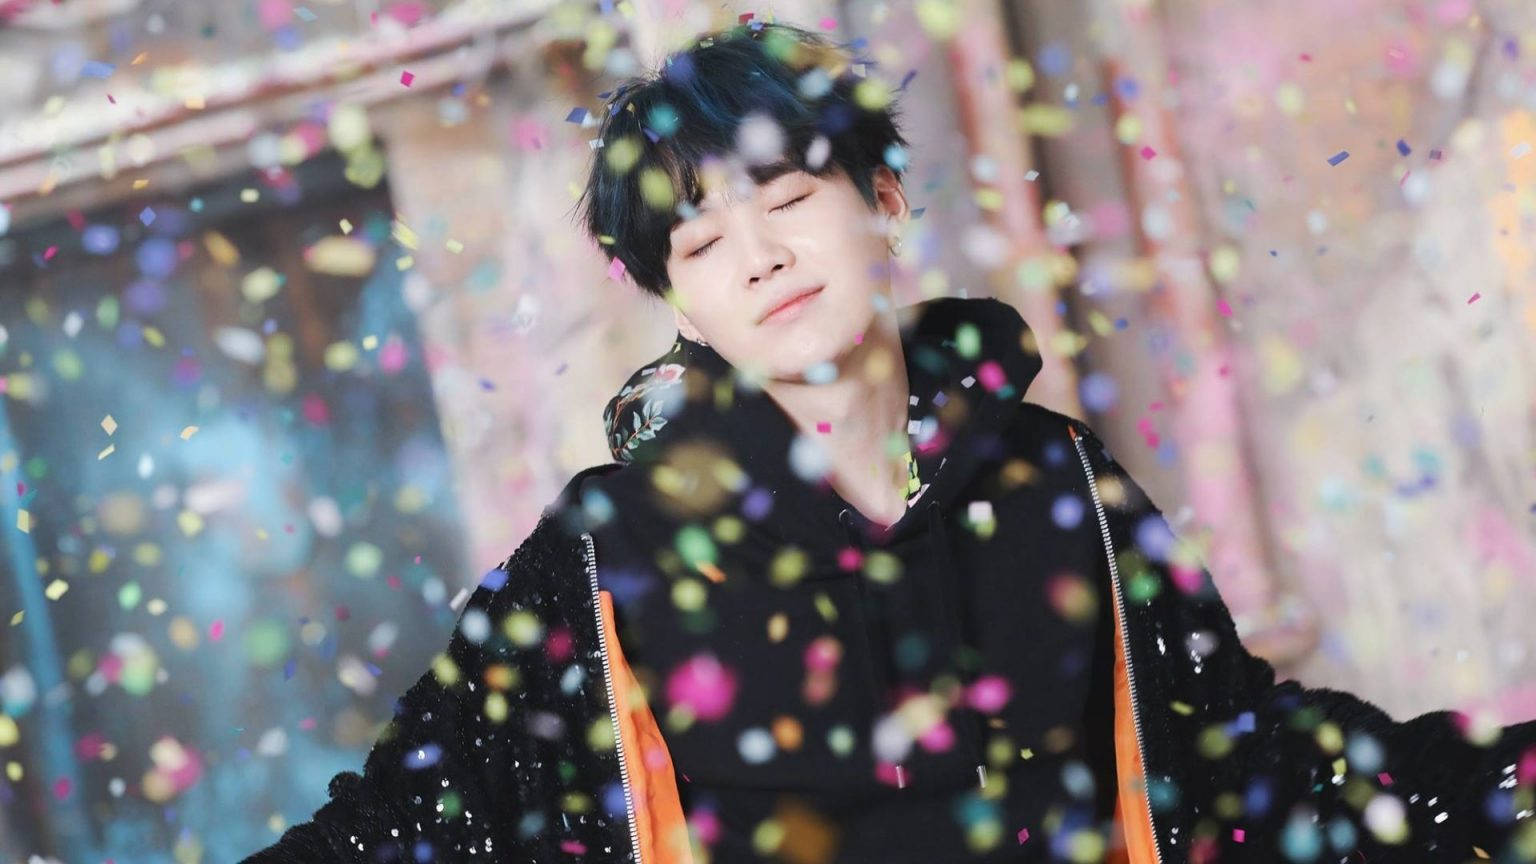 Bts's Suga: An Epitome Of Cuteness Wallpaper